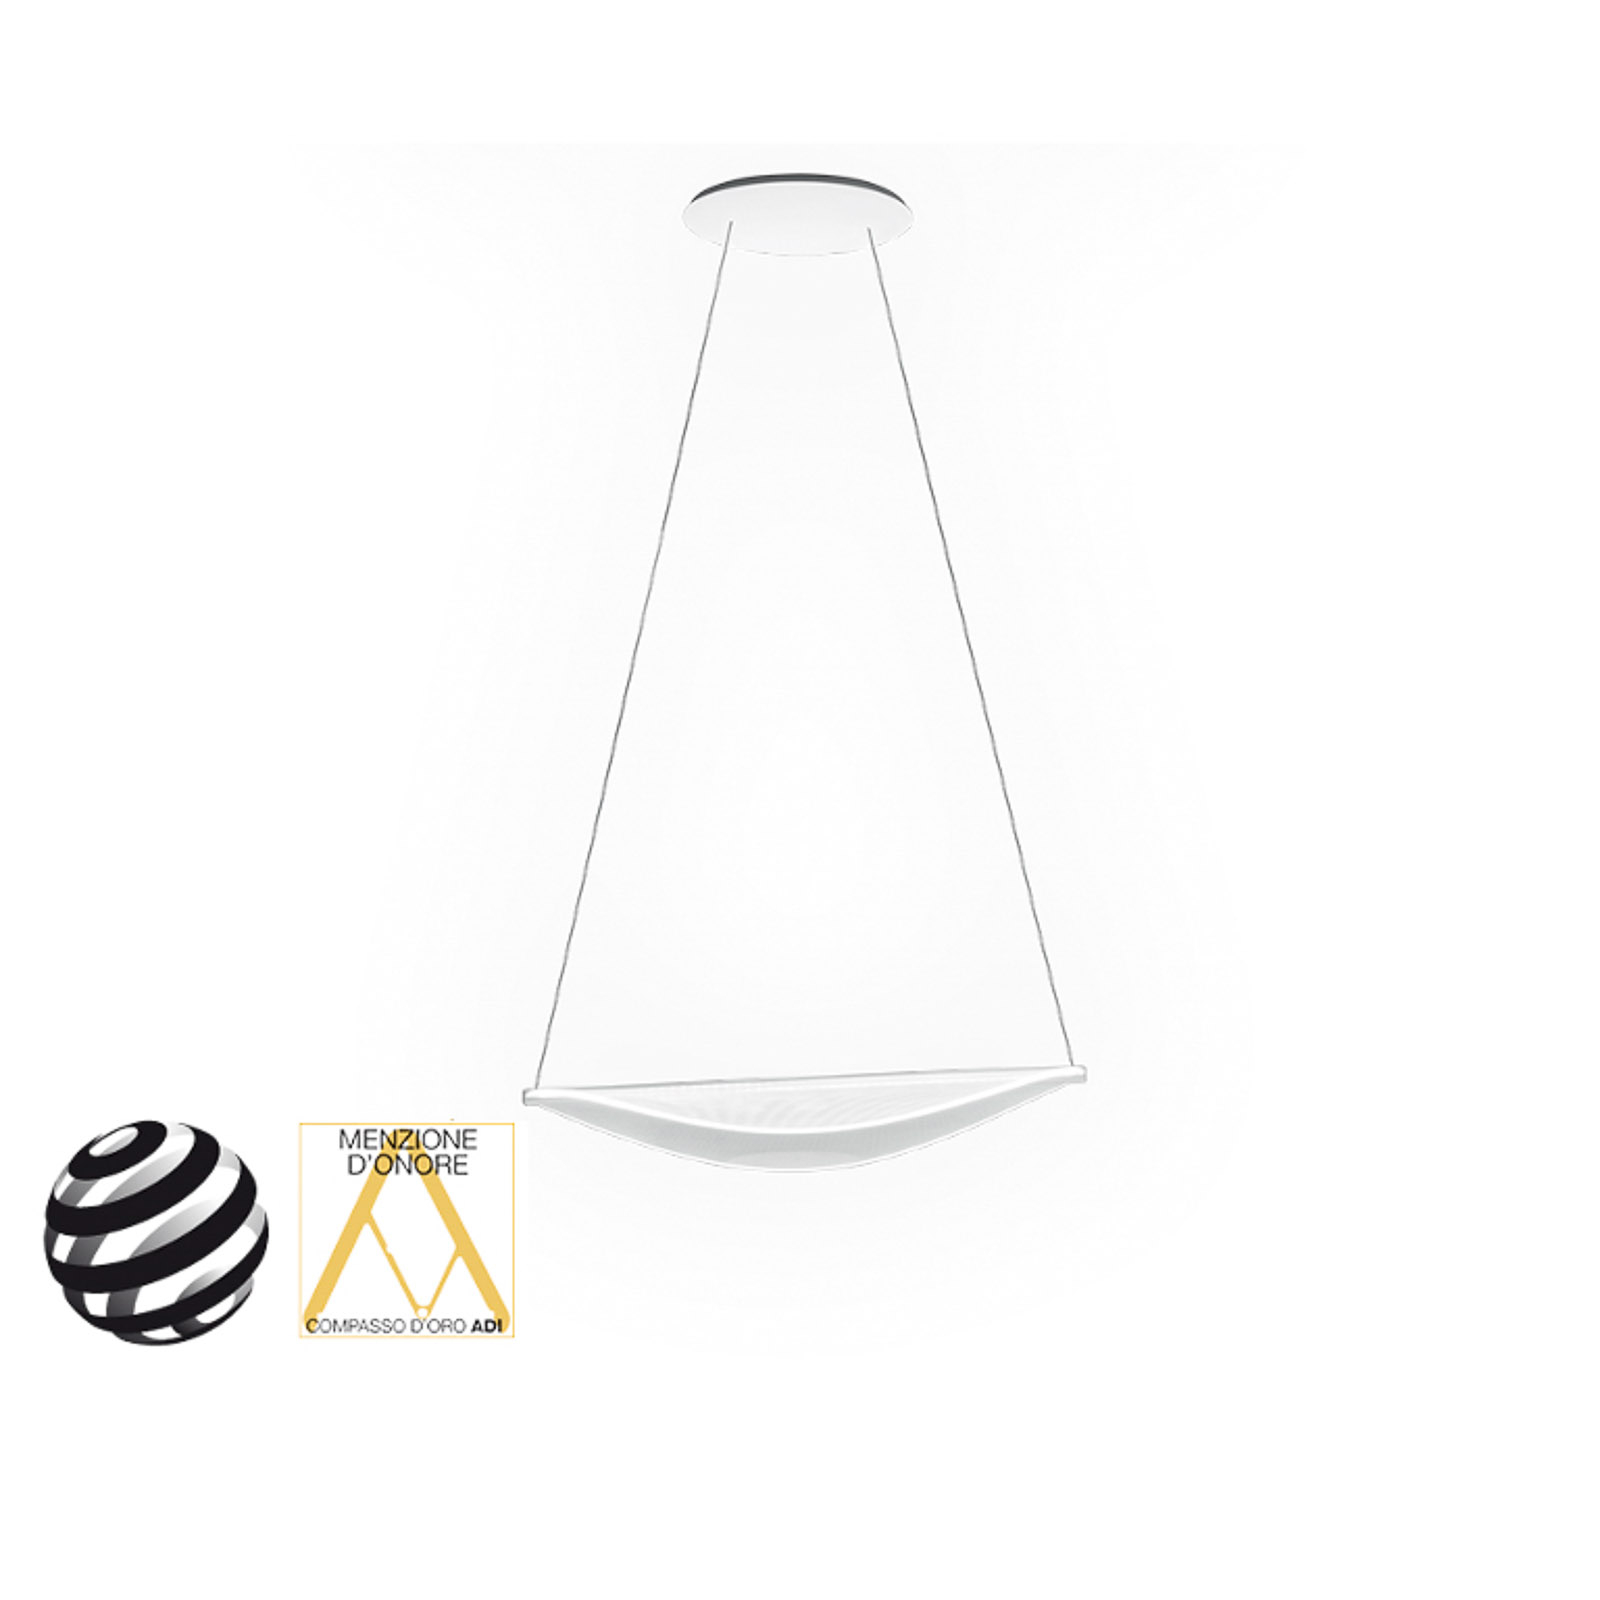 Diphy LED hanging light, 76 cm, DALI-dimmable